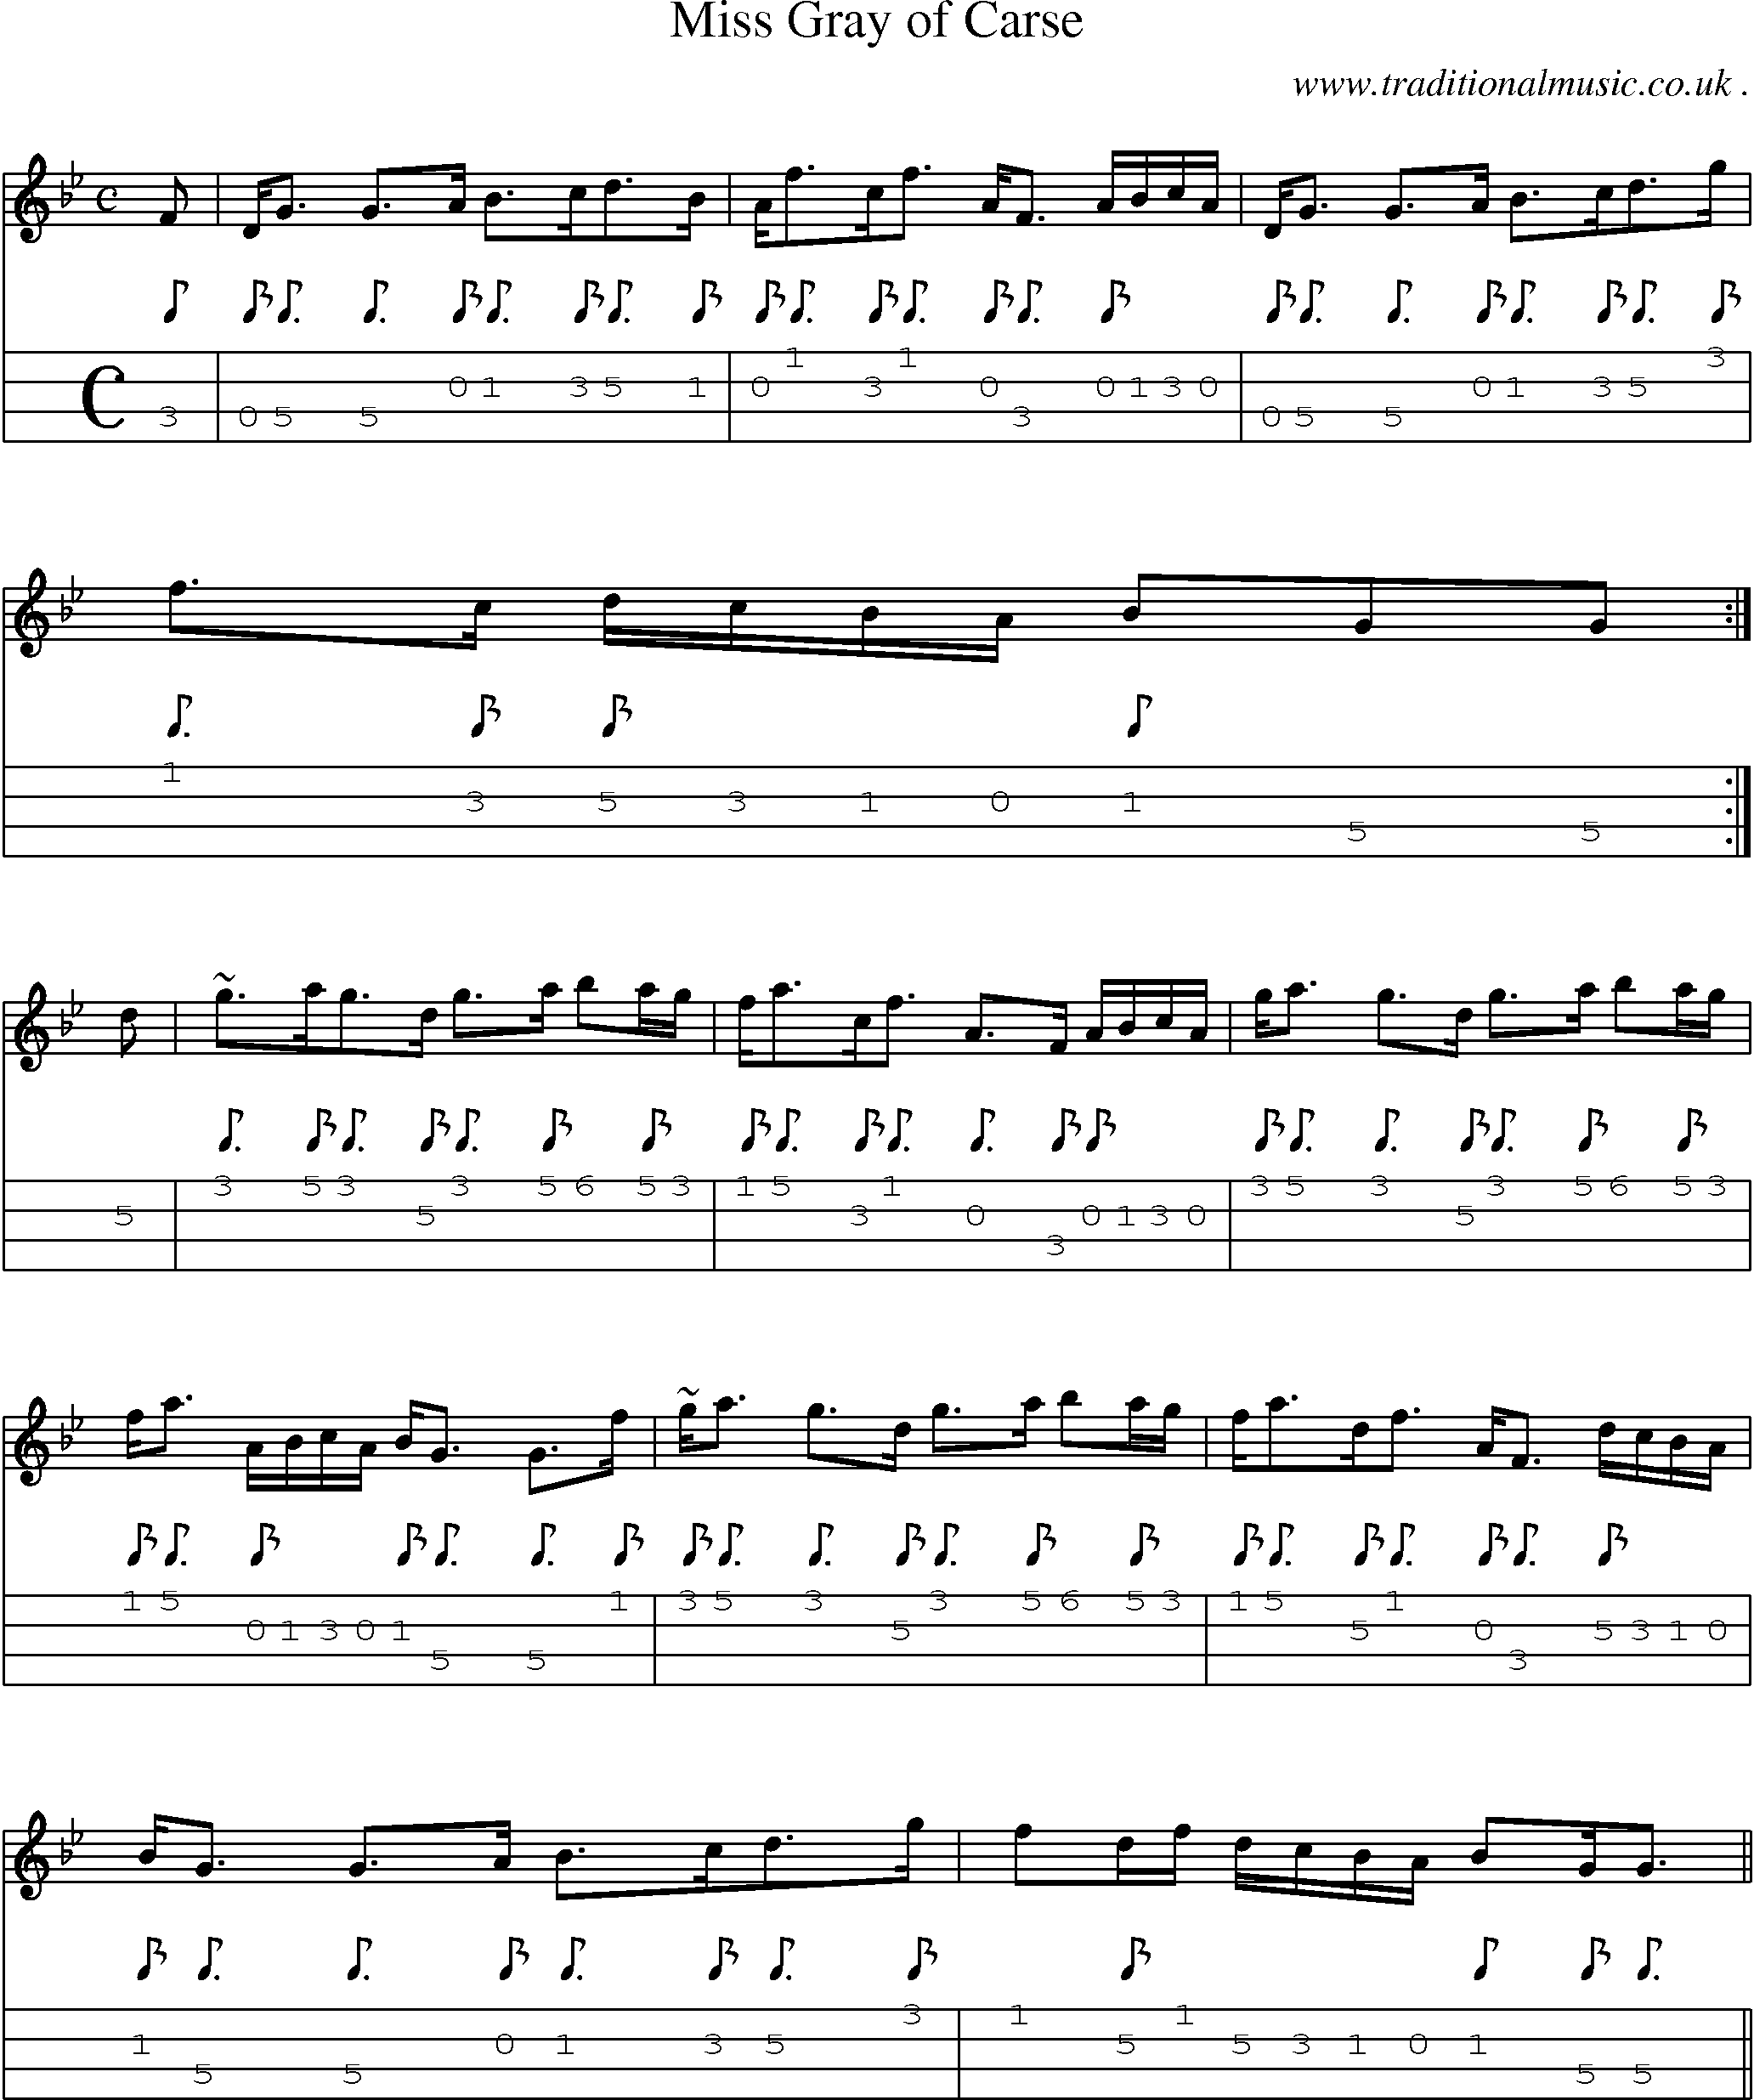 Sheet-music  score, Chords and Mandolin Tabs for Miss Gray Of Carse